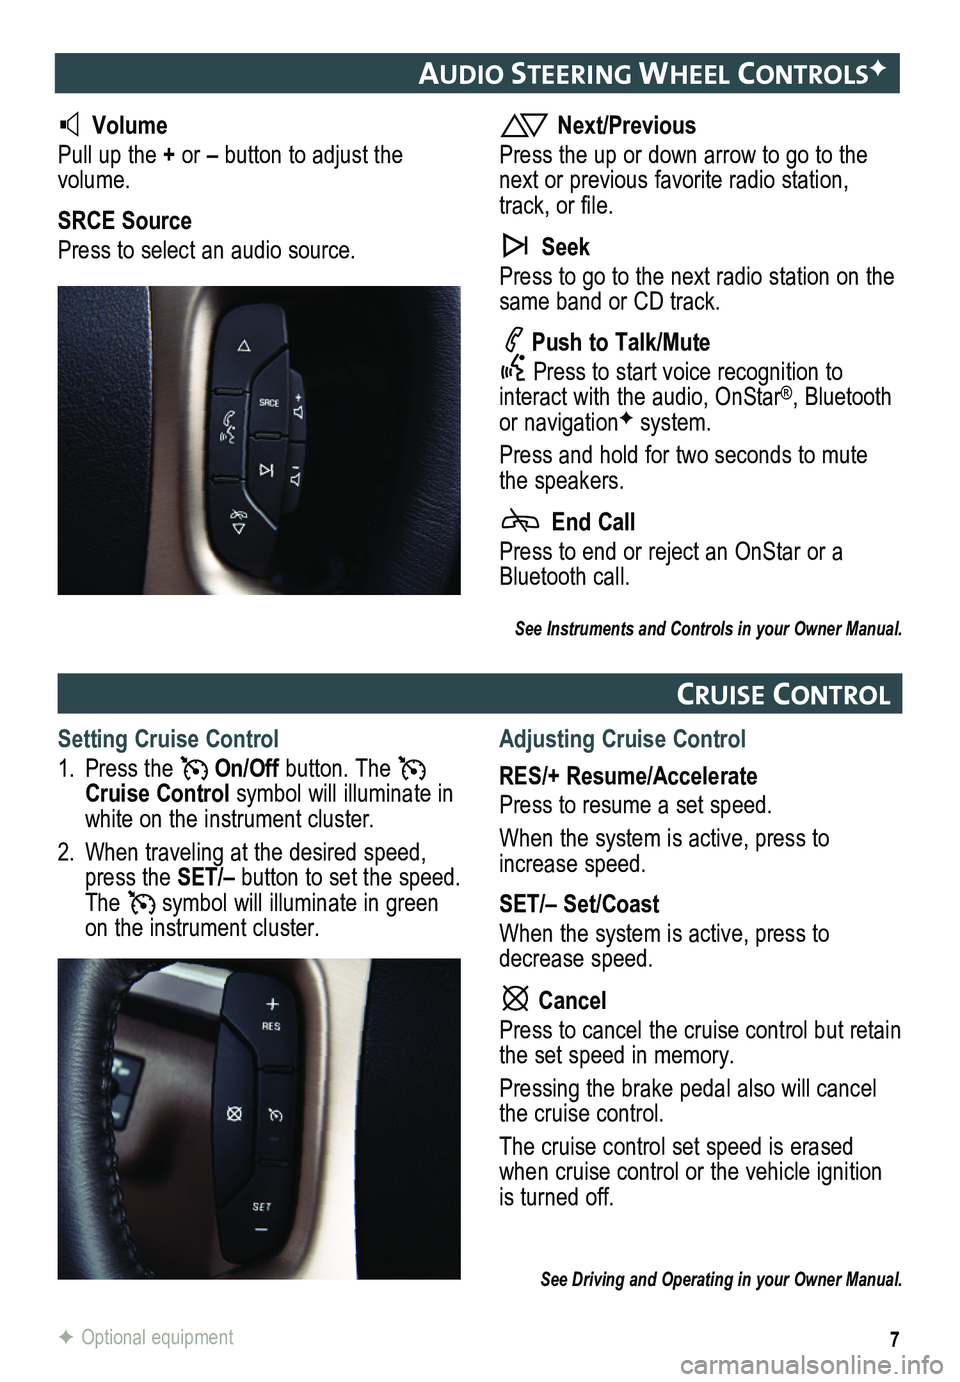 GMC ACADIA 2015  Get To Know Guide 7
audIo steerIng wheel ControlsF
  Volume
Pull up the + or – button to adjust the volume.
SRCE Source
Press to select an audio source.
 Next/Previous
Press the up or down arrow to go to the next or 